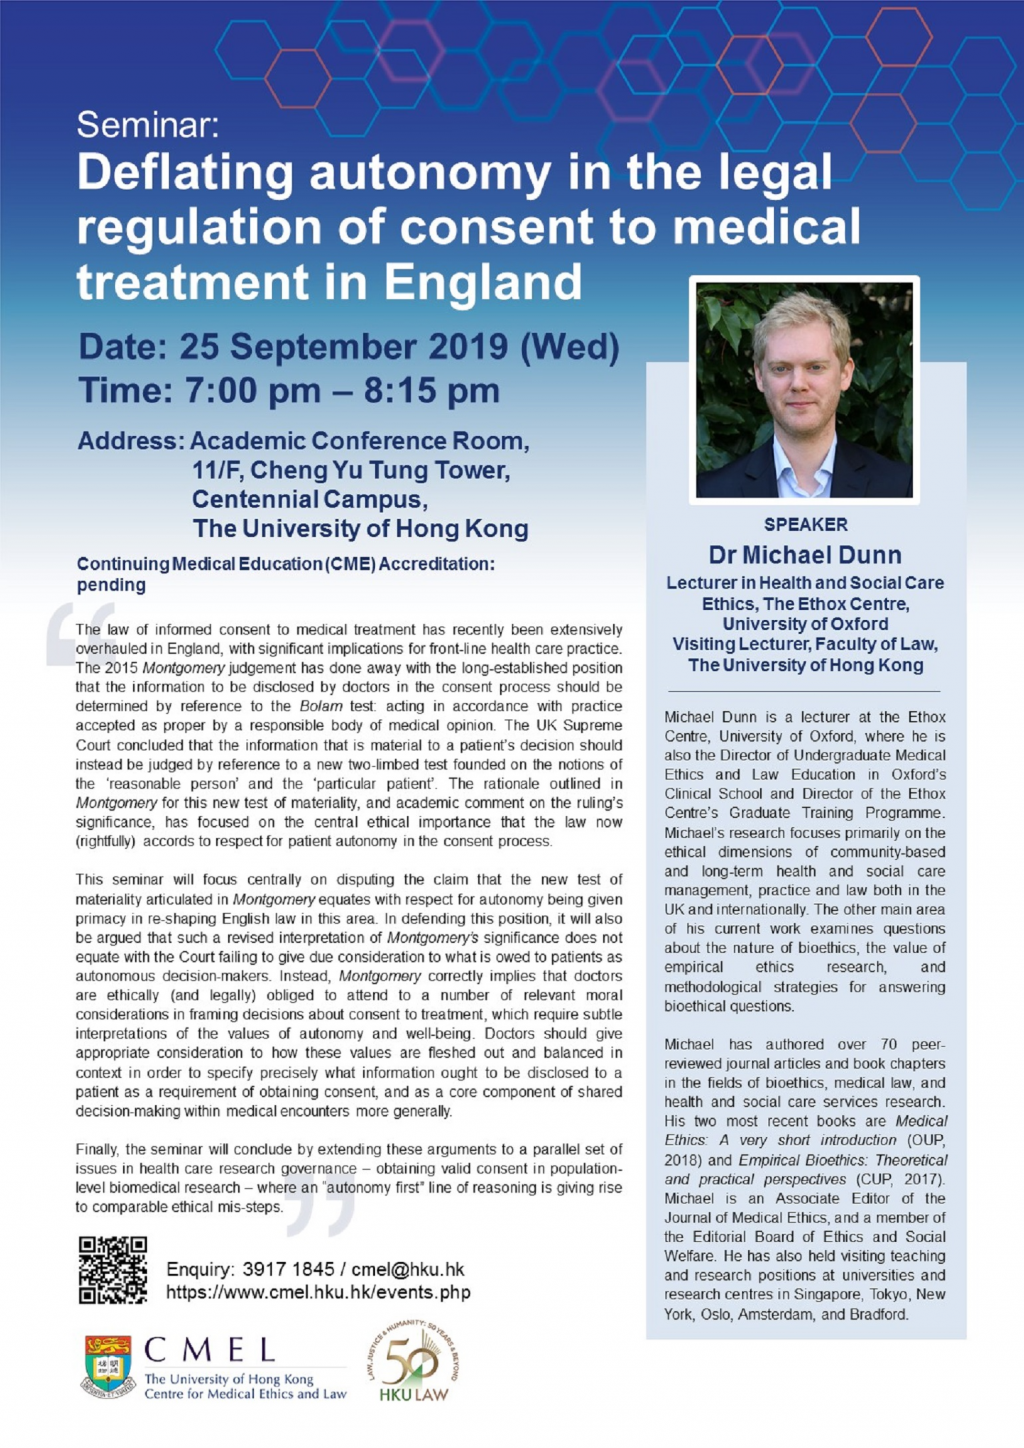 Seminar: Deflating autonomy in the legal regulation of consent to medical treatment in England